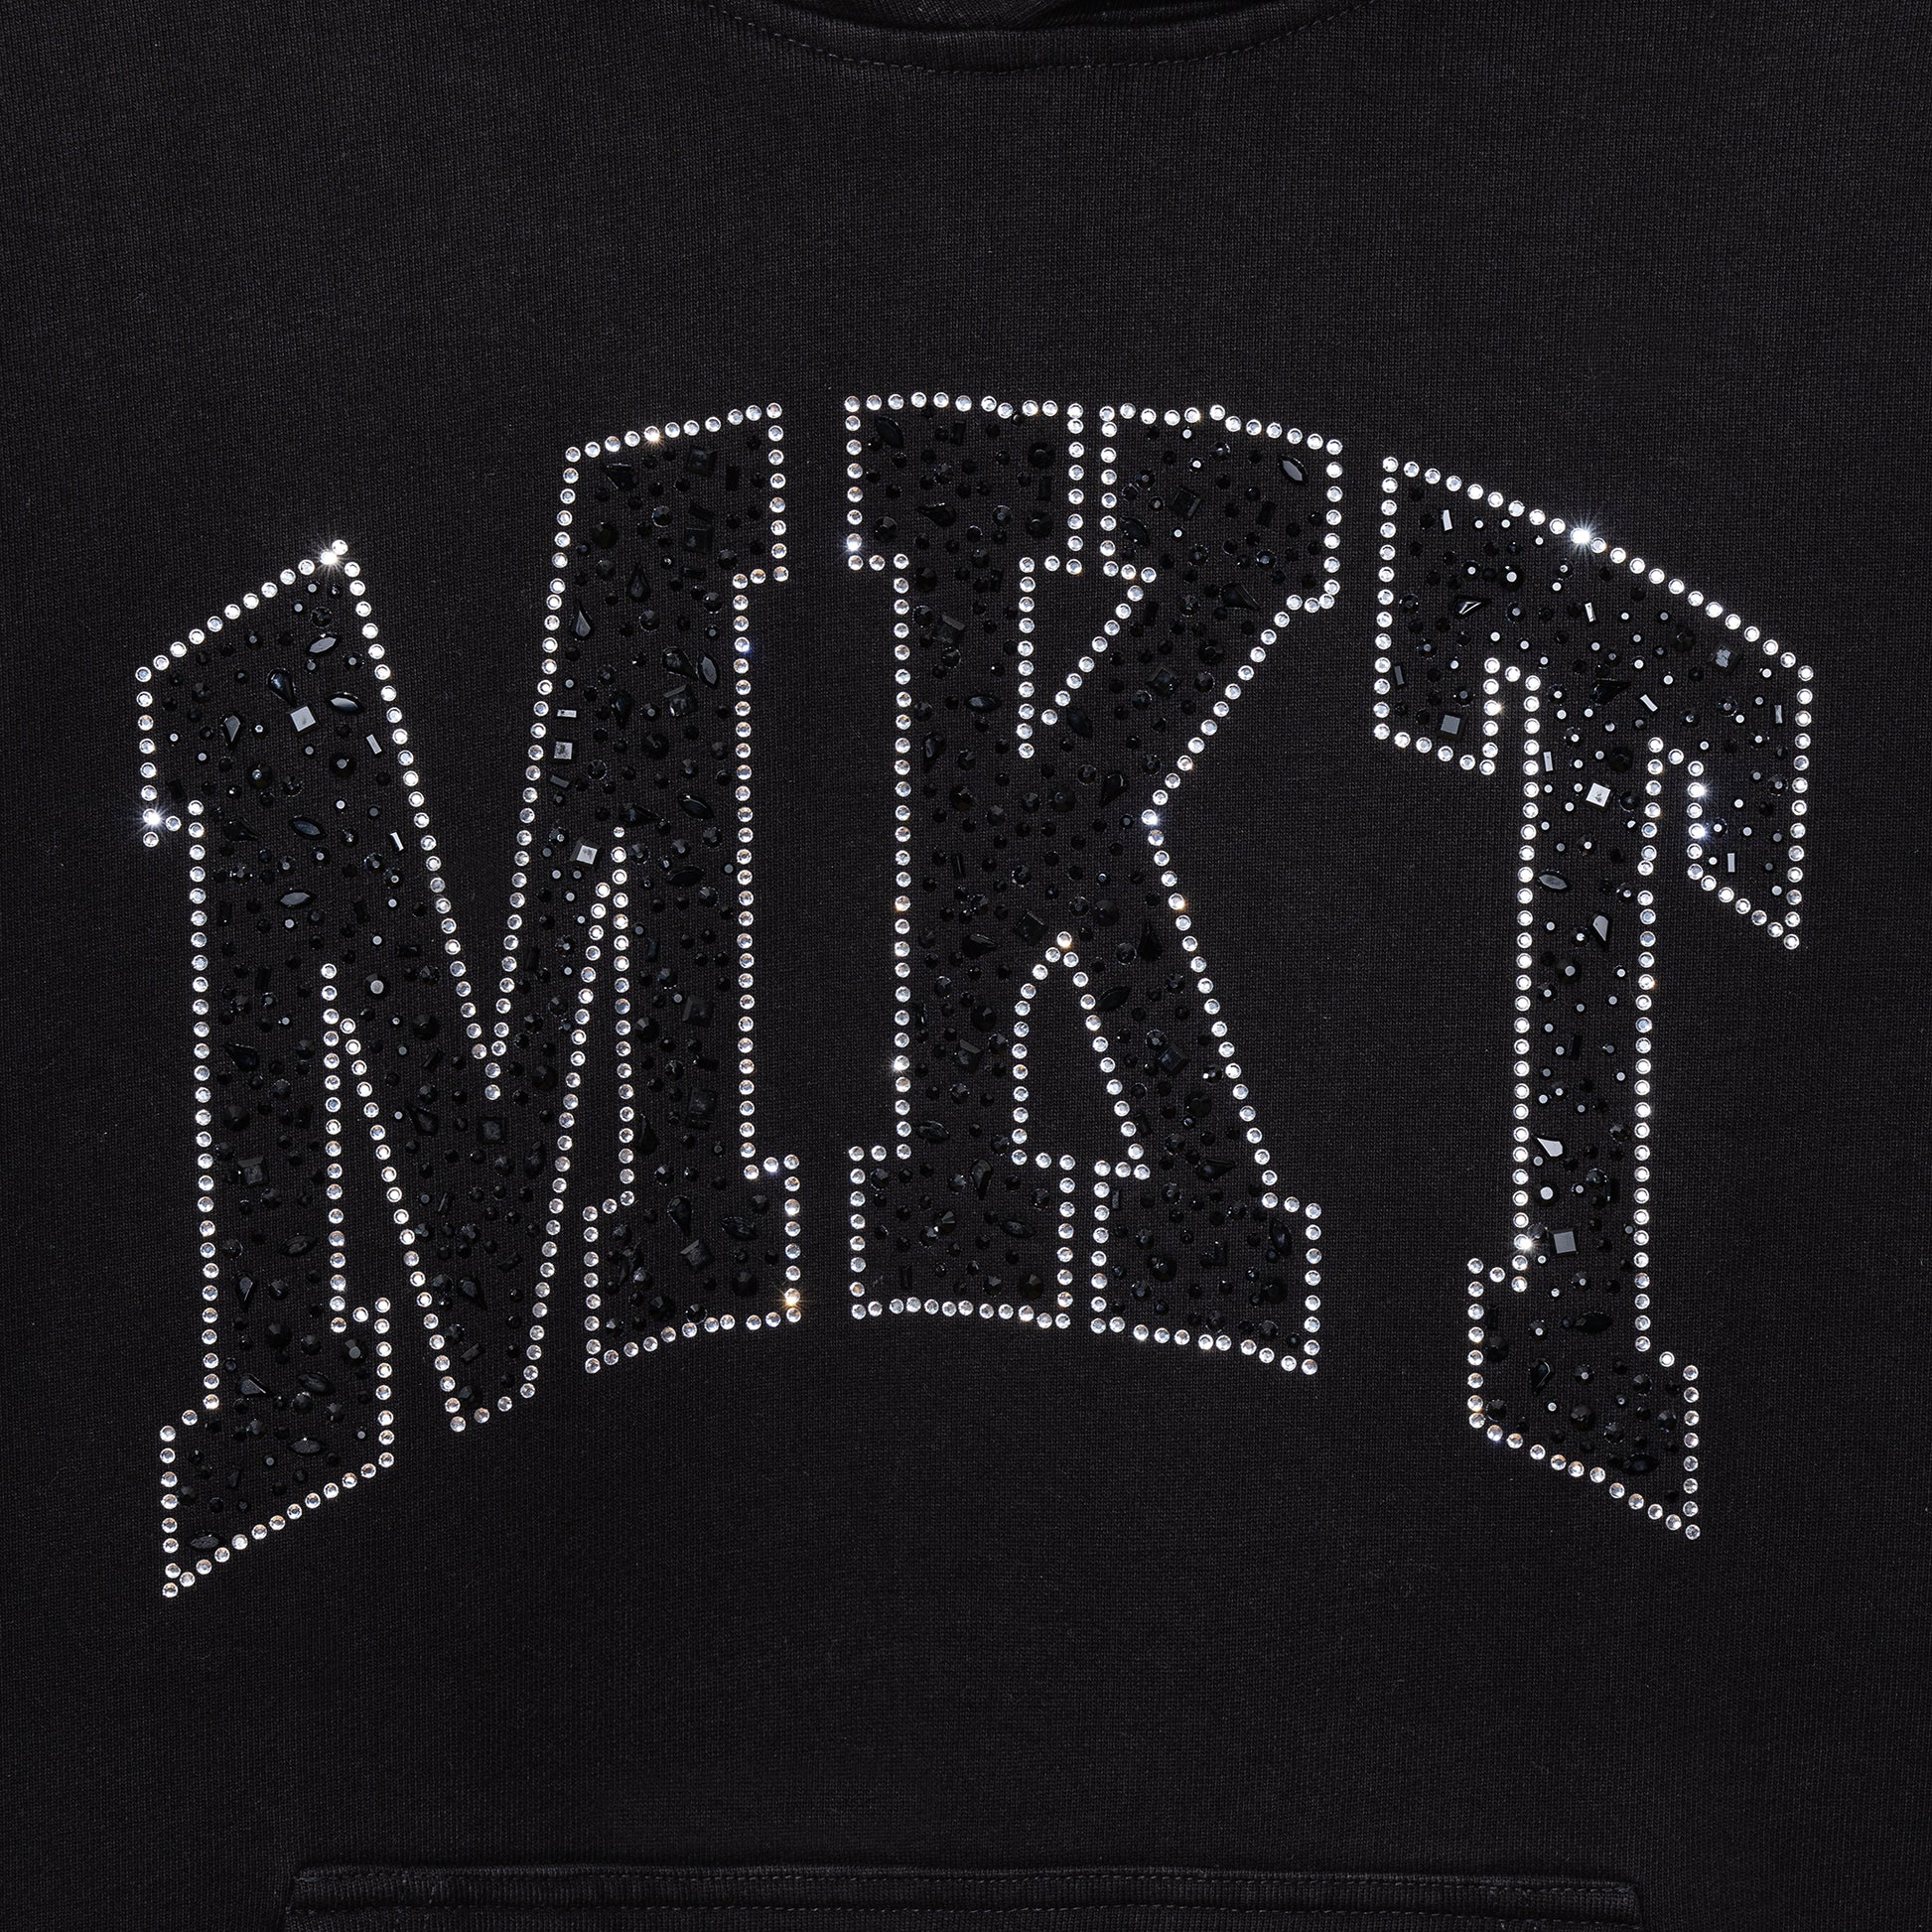 MARKET clothing brand MKT RHINESTONE ARC HOODIE. Find more graphic tees, hats and more at MarketStudios.com. Formally Chinatown Market.